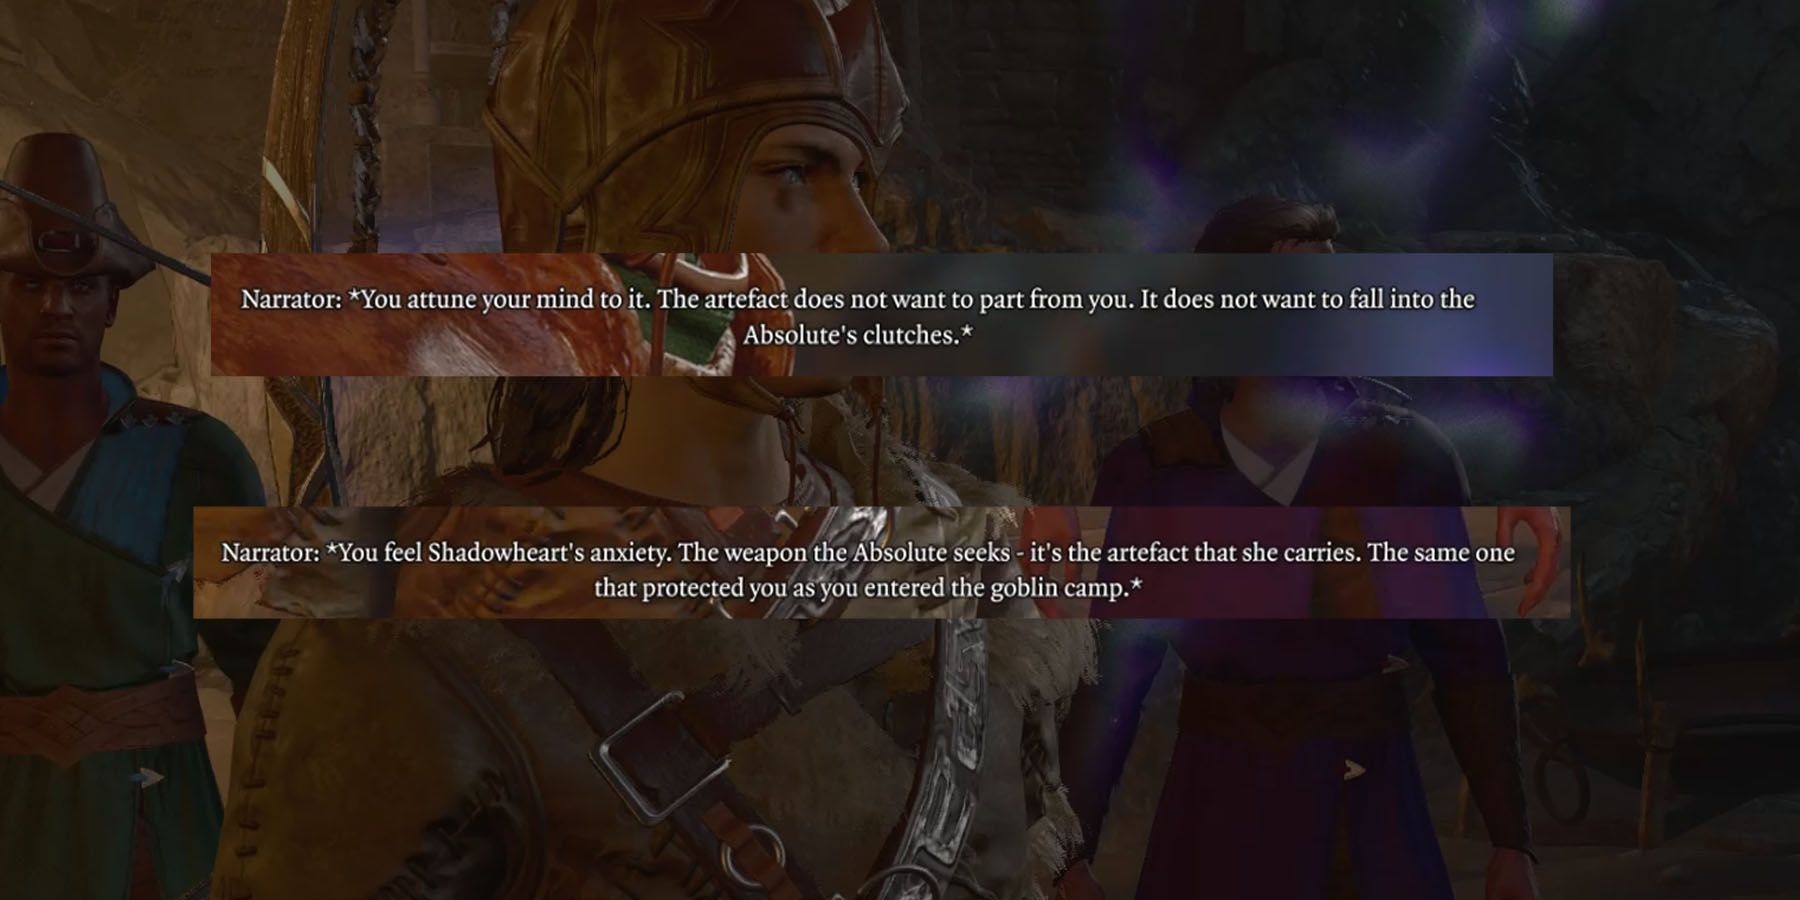 Two dialogues may appear depending on who accompanies the player